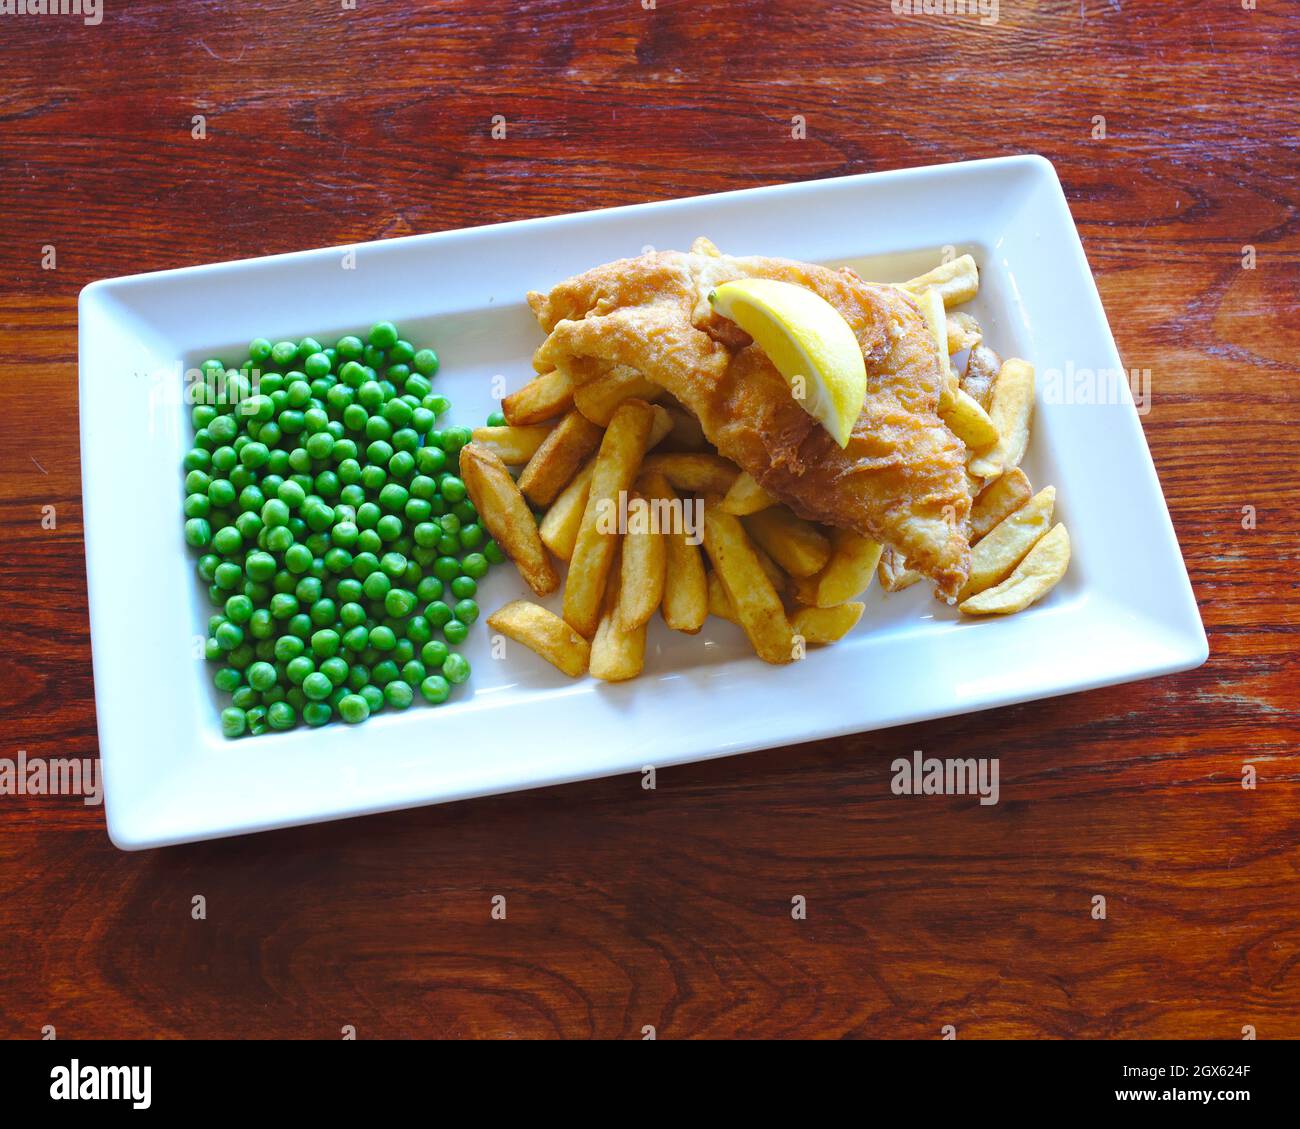 Traditional English Fish and chips pub meal Stock Photo